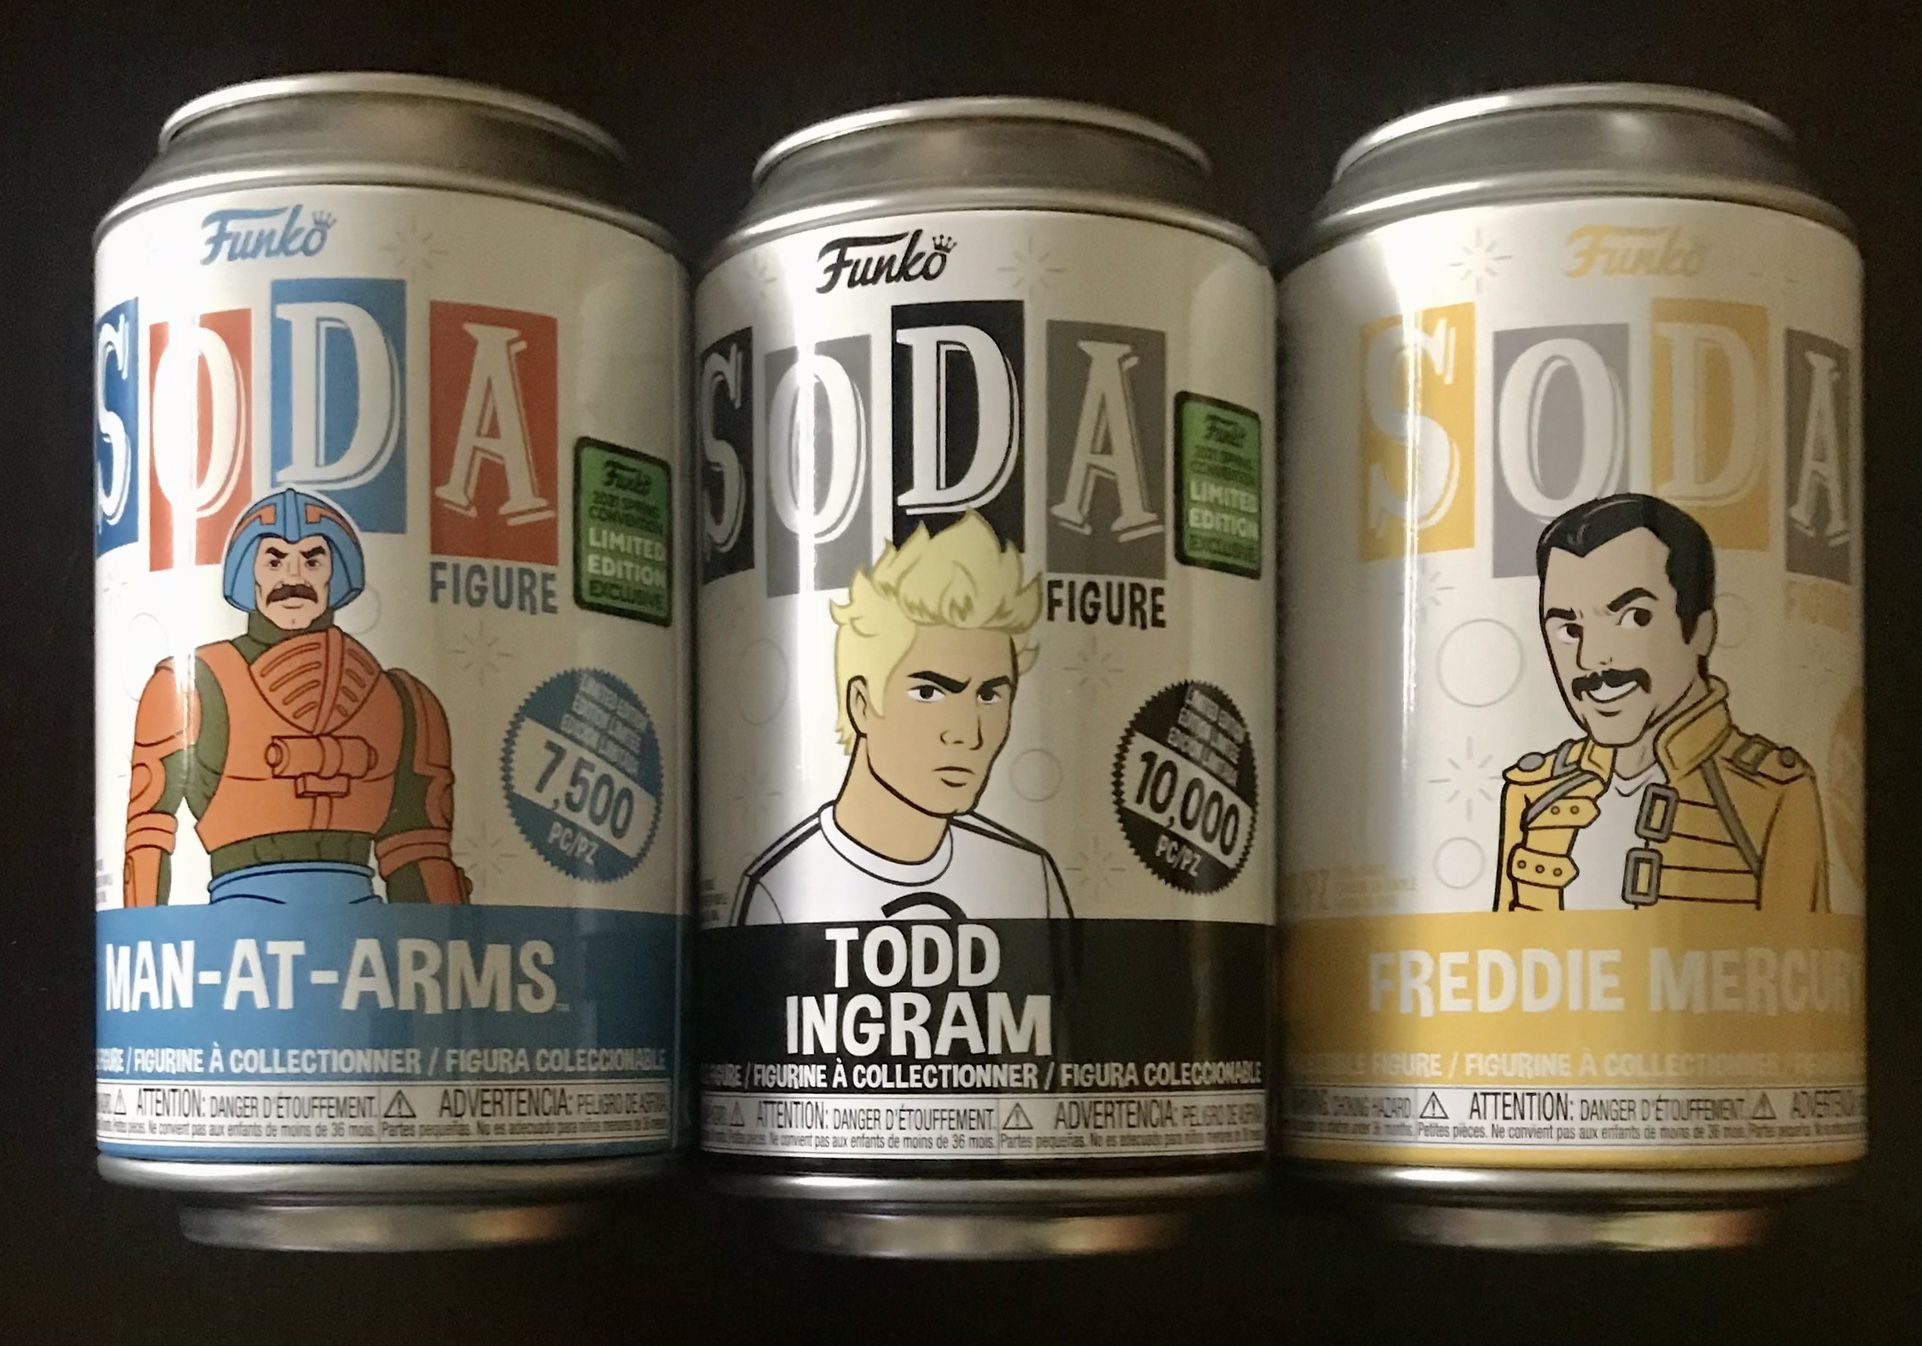 Funko Soda POP! Freddie Mercury, Todd Ingram & Man-At-Arms Commons 2021 ECCC Exclusive Limited PCS. Cans are opened, Bags with Figures are Sealed!